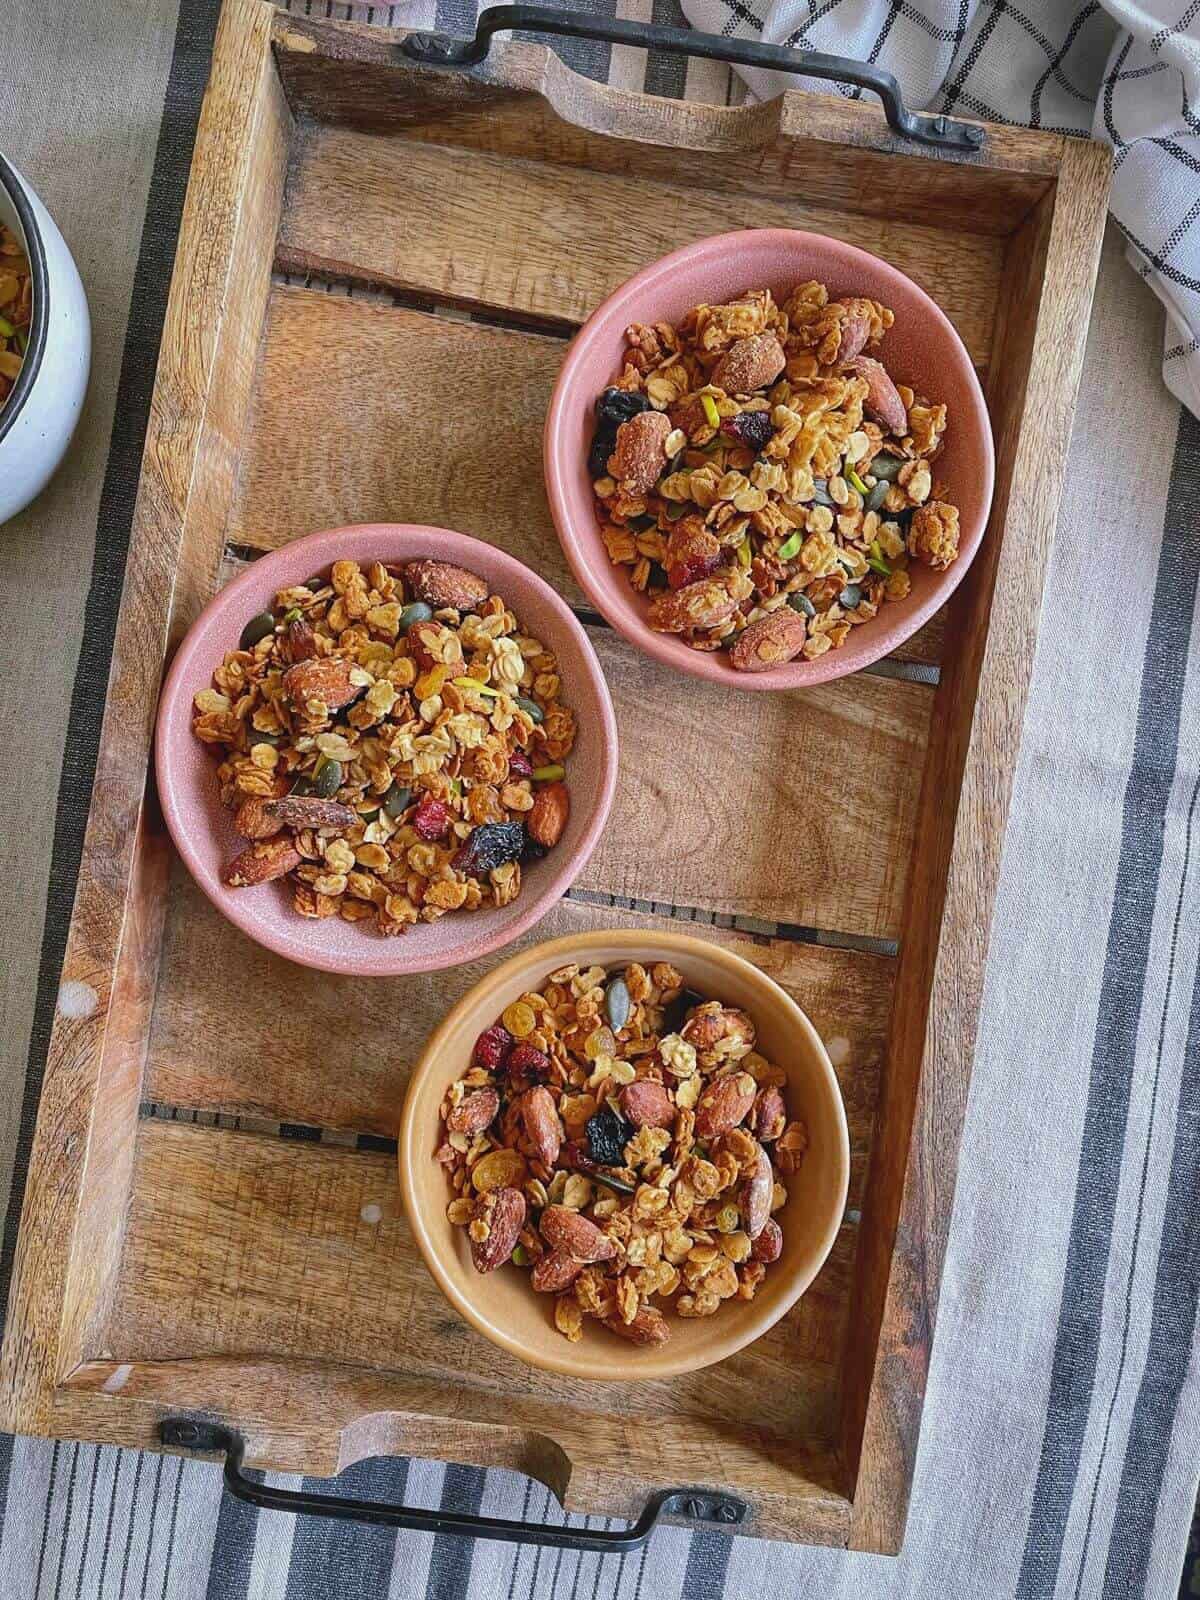 Three mini bowls of granola in a wooden serving tray.